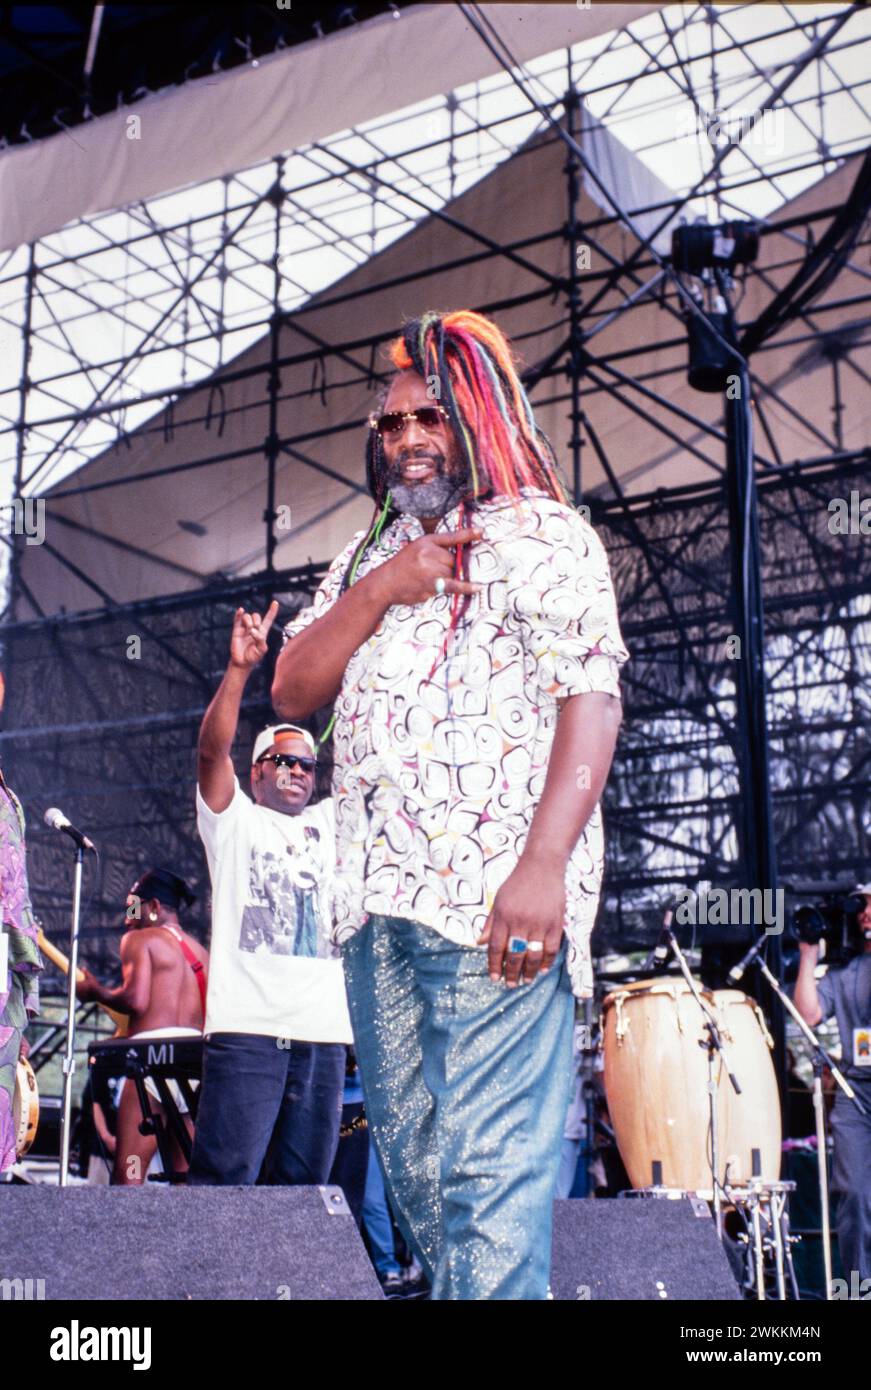 George Clinton of Parliament-Funkadelic at the Jimi Hendrix Electric Guitar Festival in Seattle, Washington September 1995 Credit: Ross Pelton/MediaPunch Stock Photo